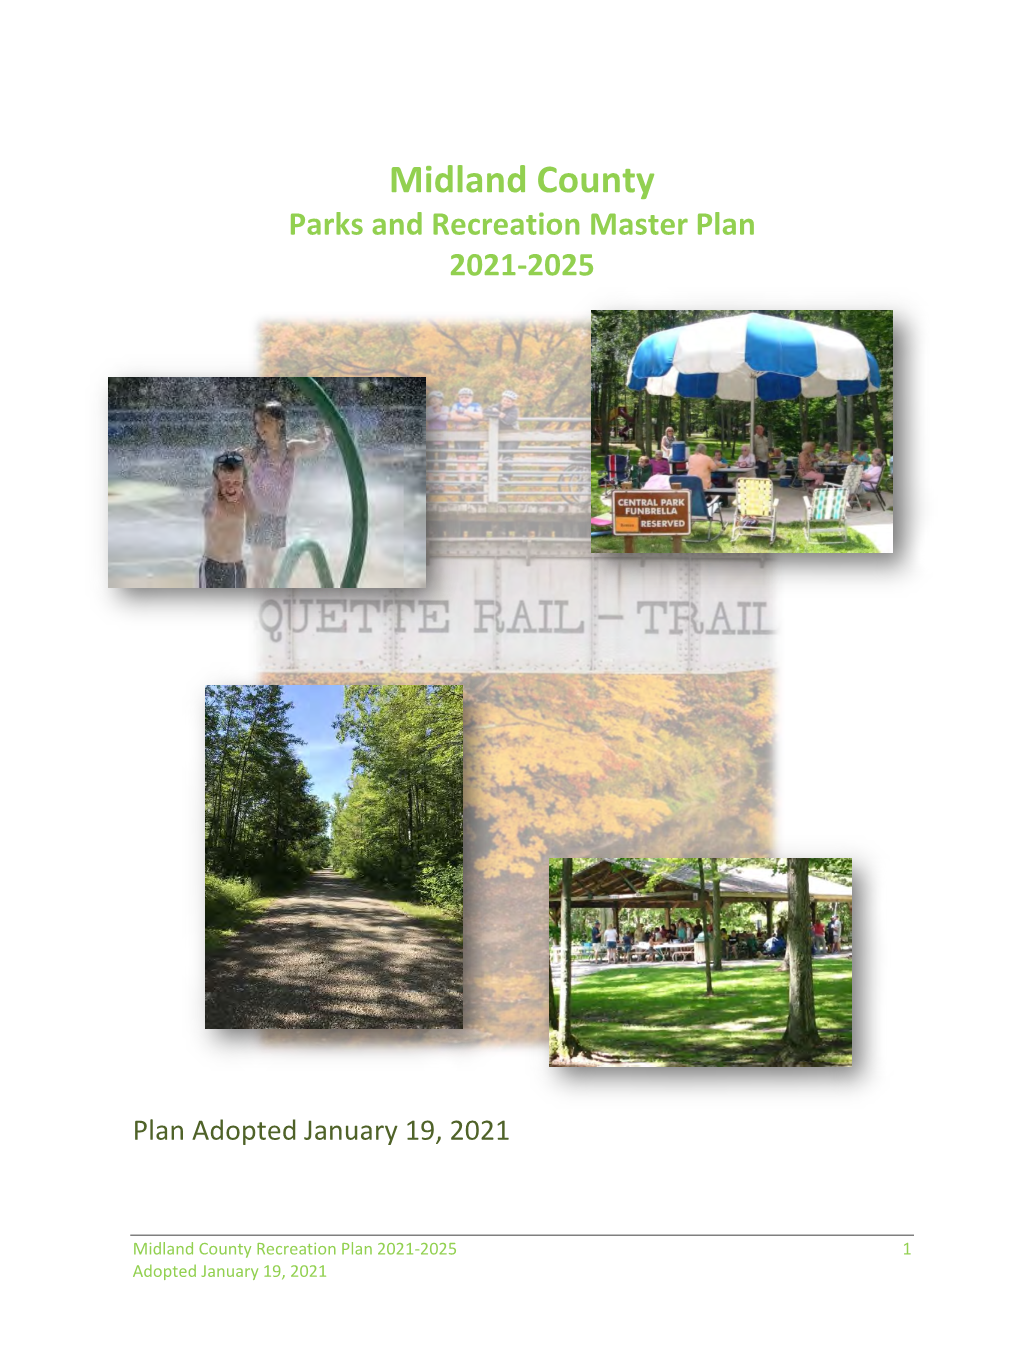 Midland County Parks and Recreation Master Plan 2021-2025